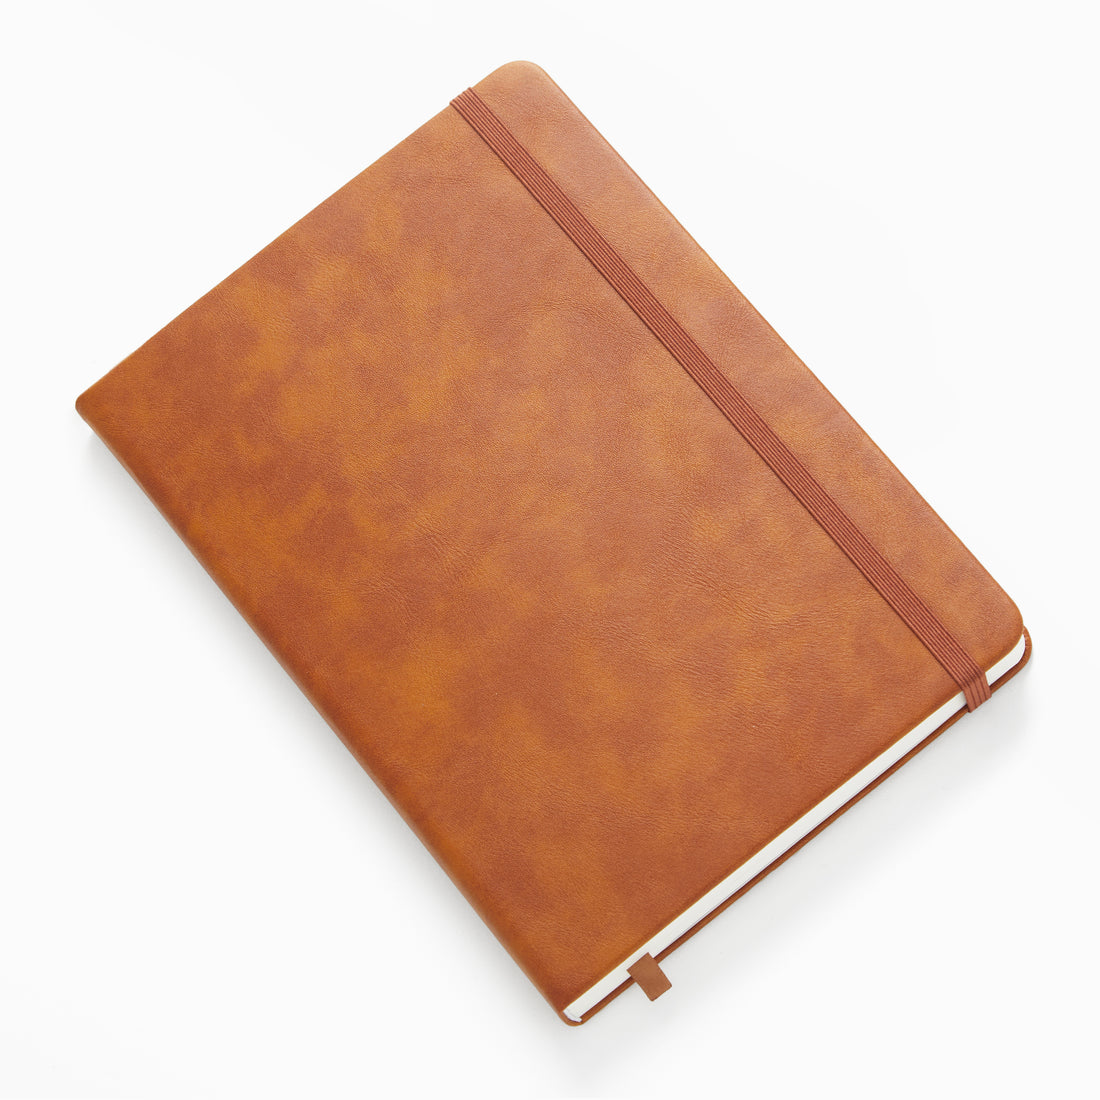 Productivity Journal for Personal Growth